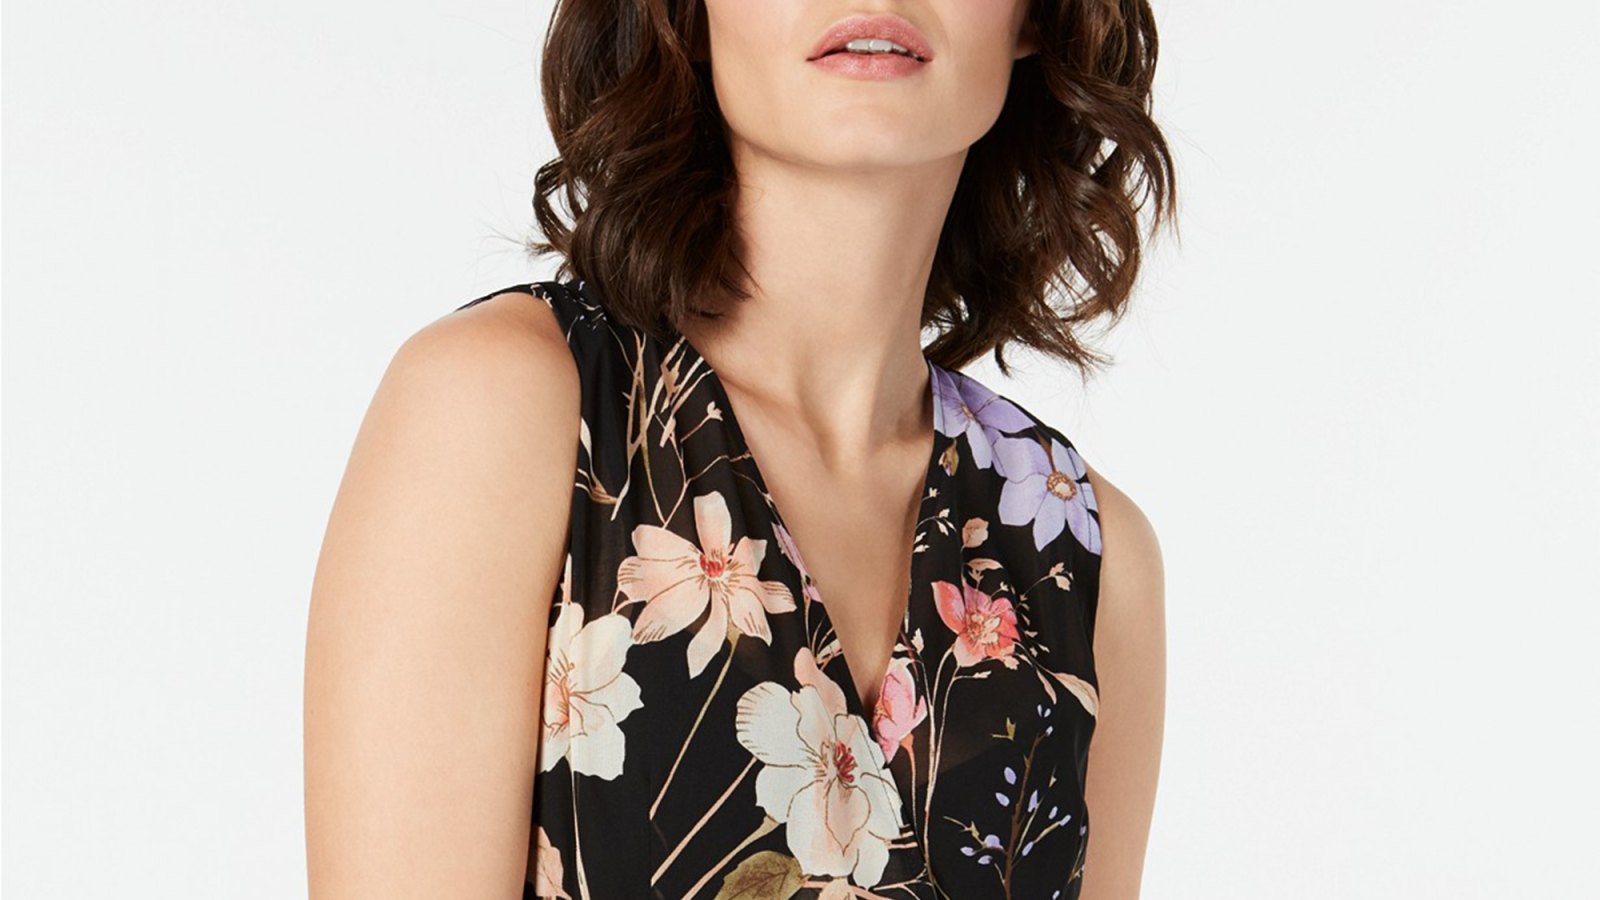 This Floral Calvin Klein Dress Is Basically a Compliment Magnet